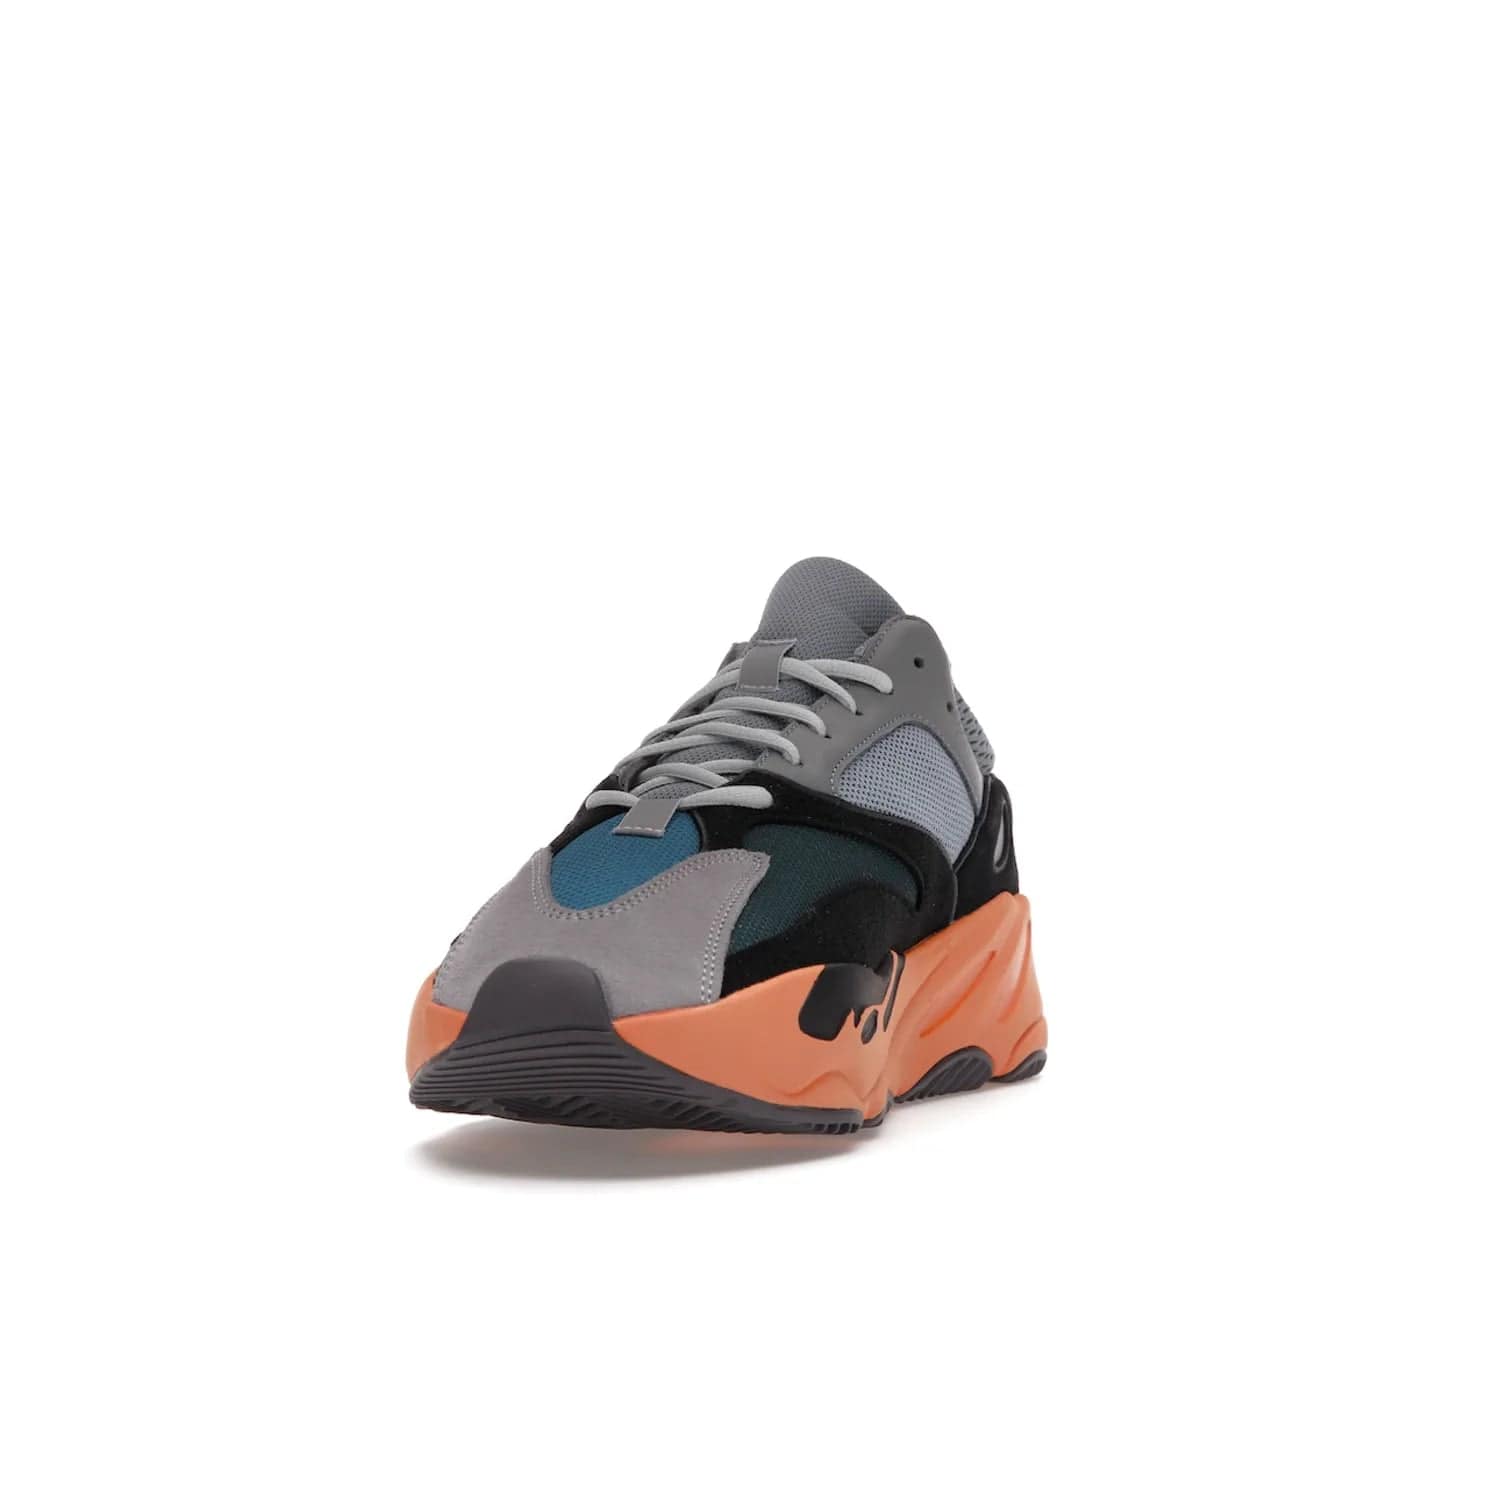 adidas Yeezy Boost 700 Wash Orange - Image 12 - Only at www.BallersClubKickz.com - Introducing the adidas Yeezy Boost 700 Wash Orange. Unique grey leather, suede, mesh upper and teal panels with a chunky Wash Orange Boost midsole. Release October 2021, make a statement today!